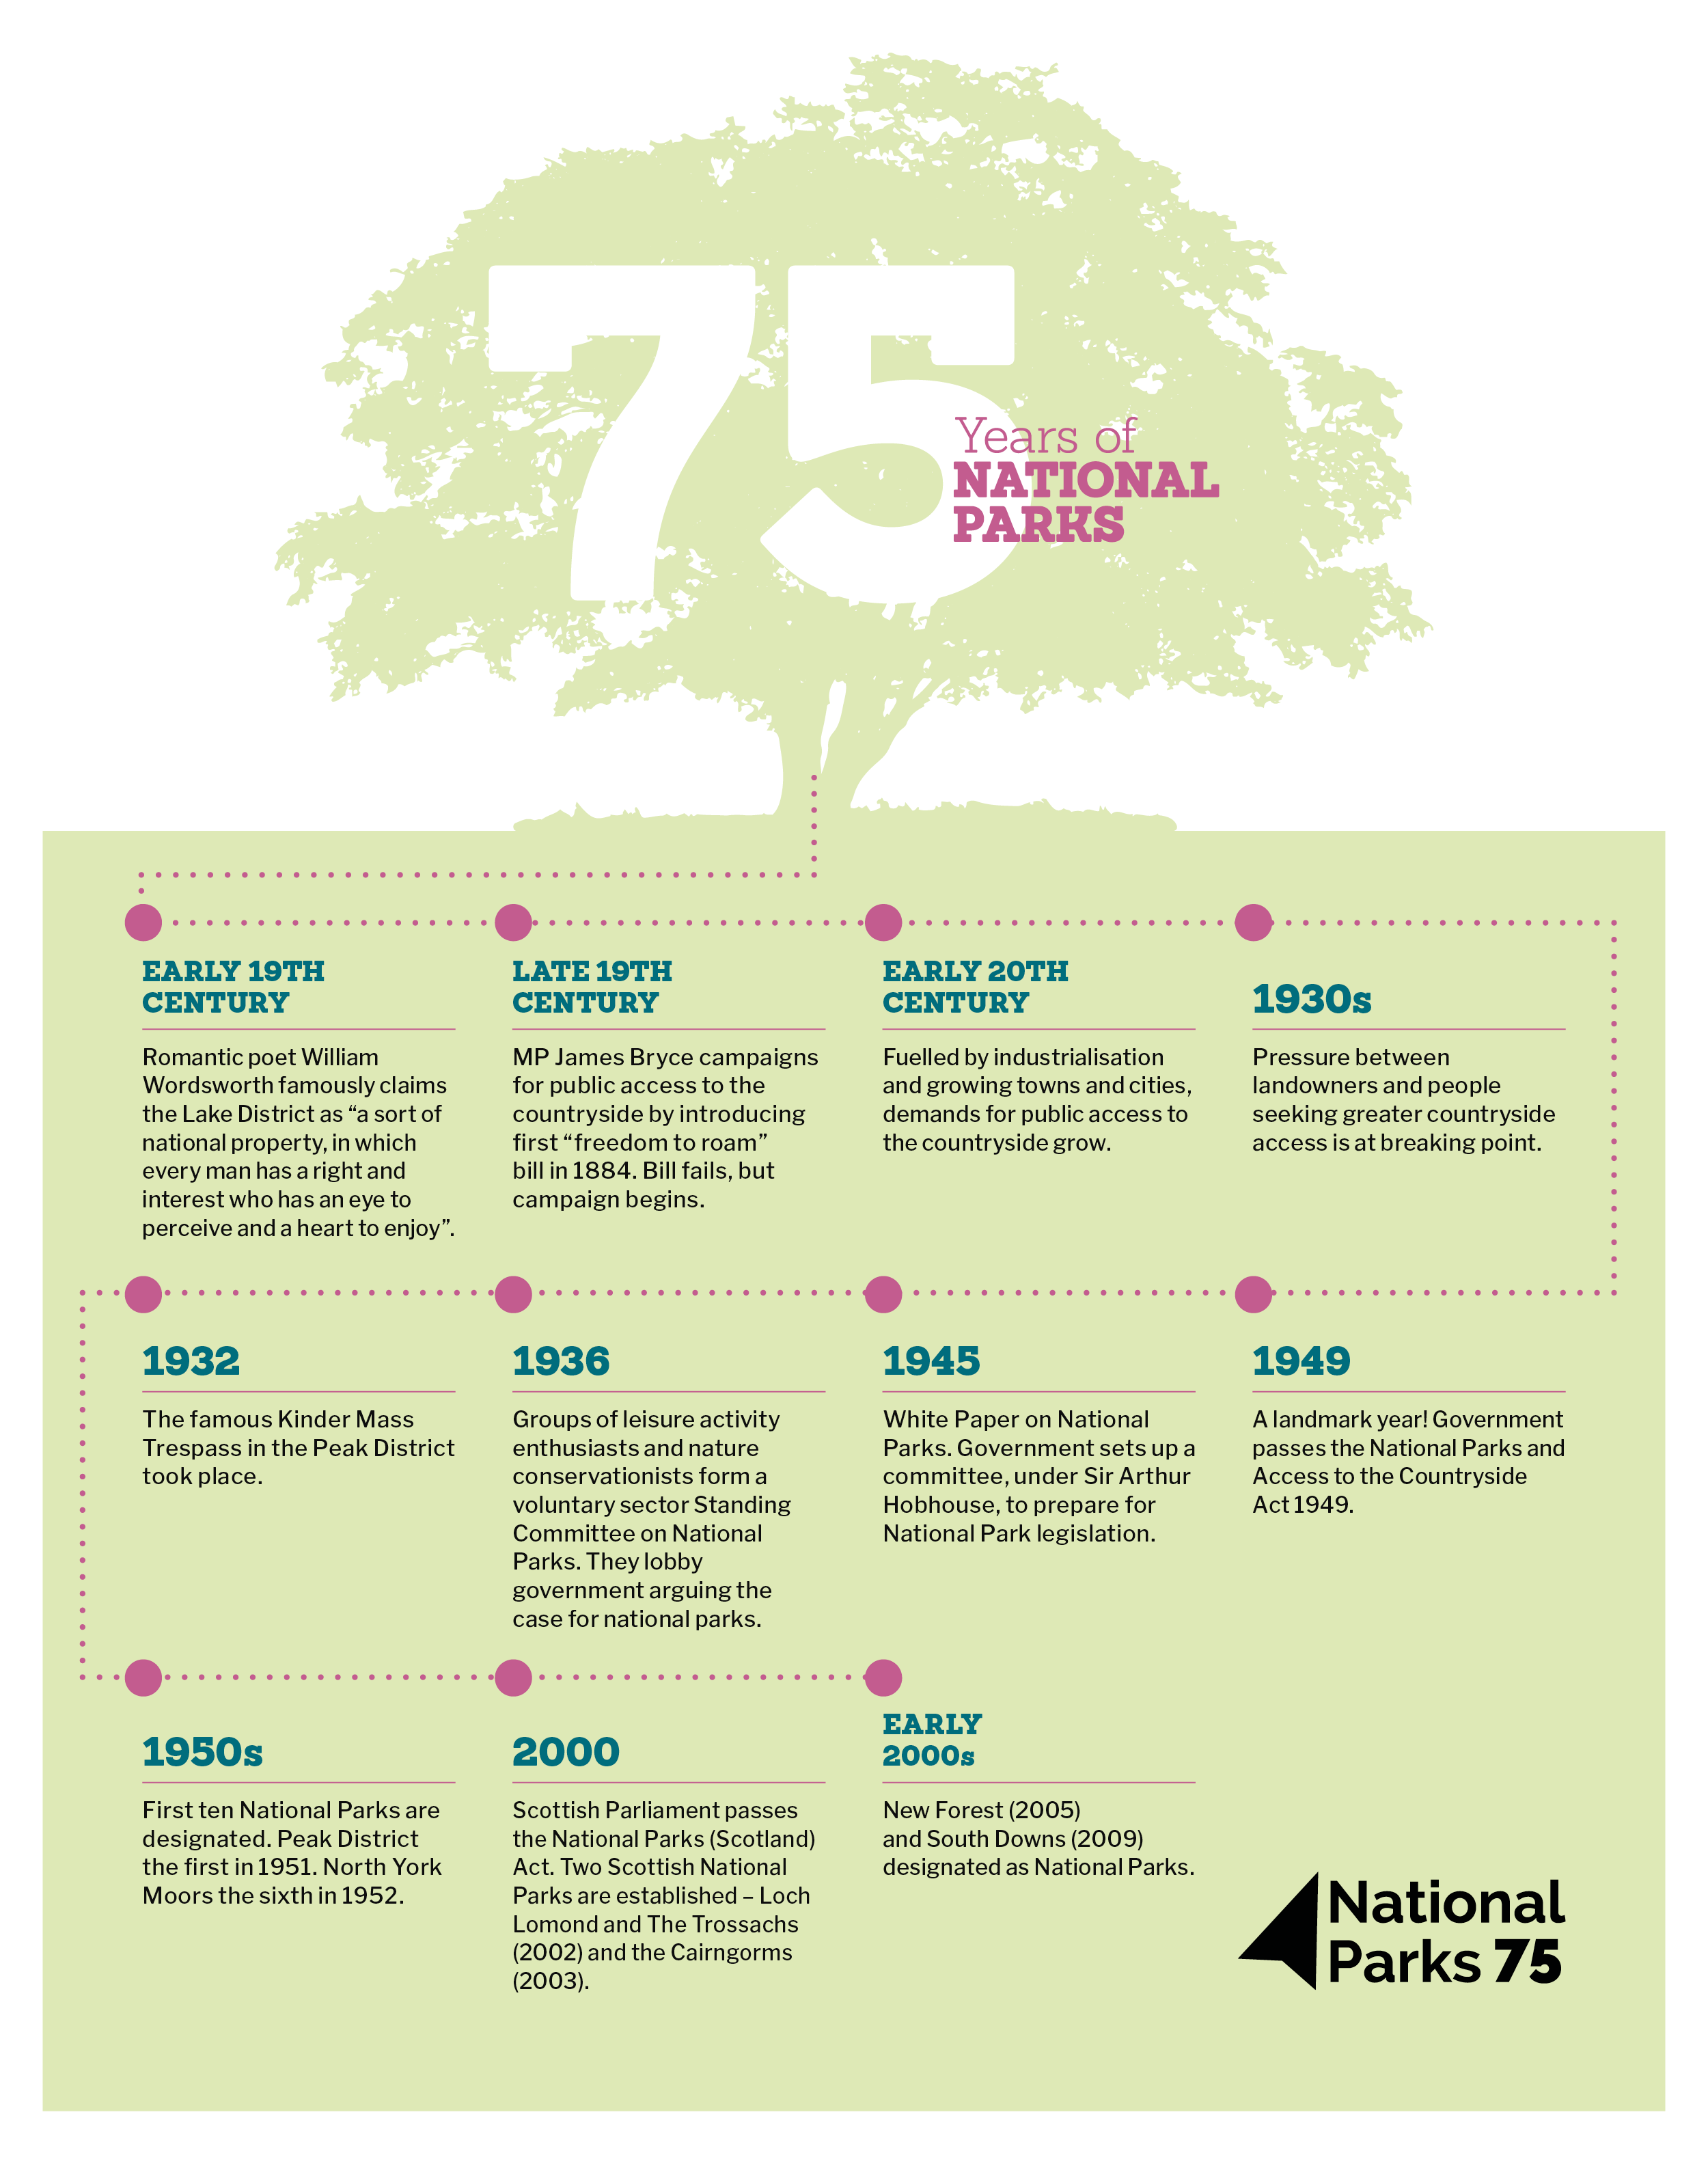 Infographic showing the history of National Parks in the UK. It shows a tree at the top of the image with the various stages of National Parks history represented as roots of the tree.